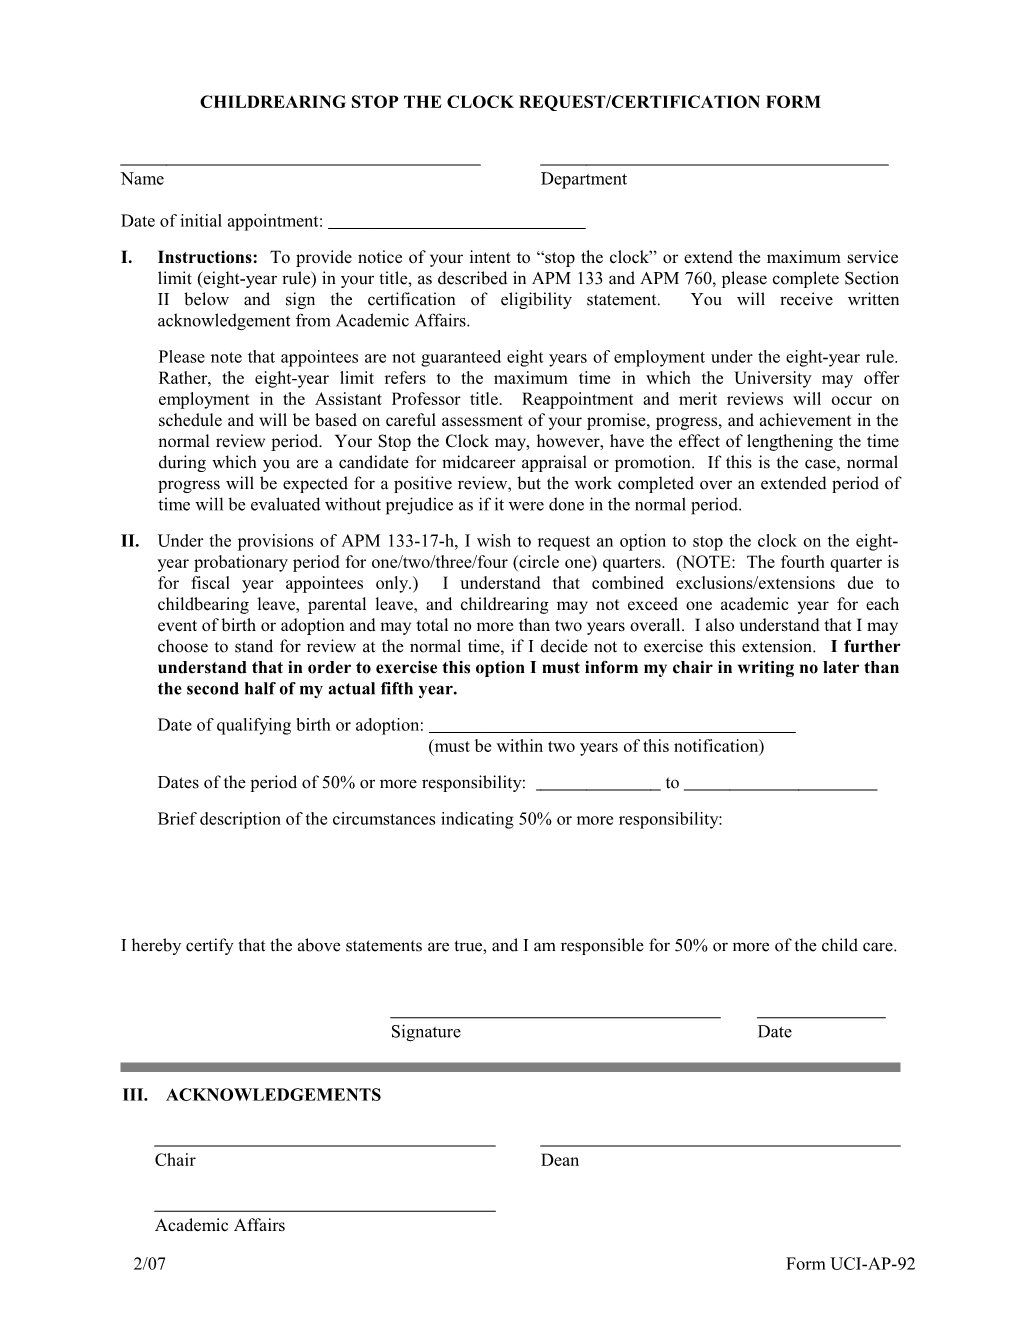 Childrearing Stop the Clock Request/Certification Form